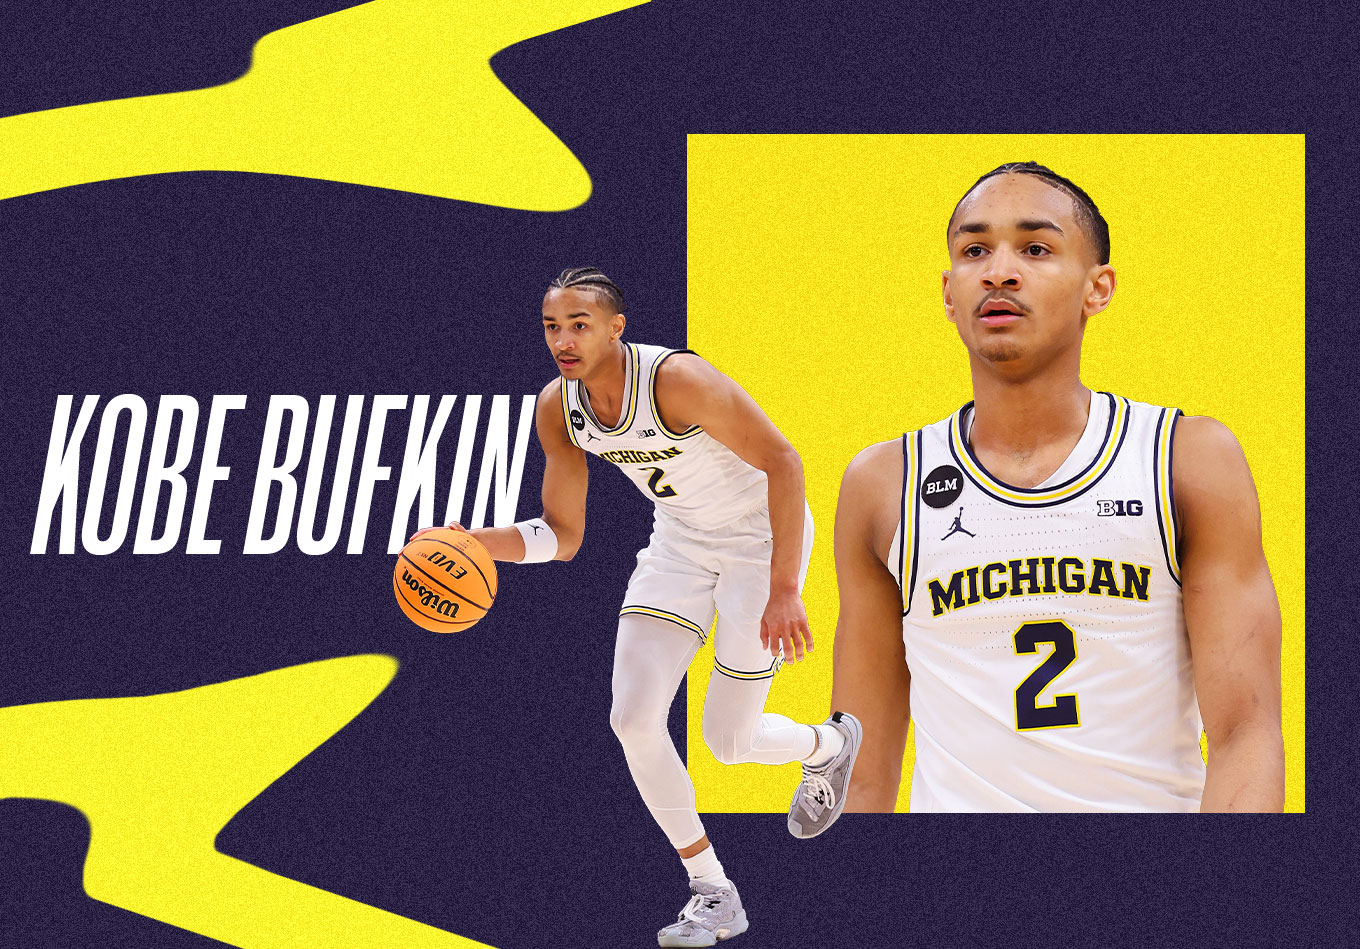 Worthy Wolverine: Why Kobe Bufkin’s NBA Draft Projection Is on the Rise